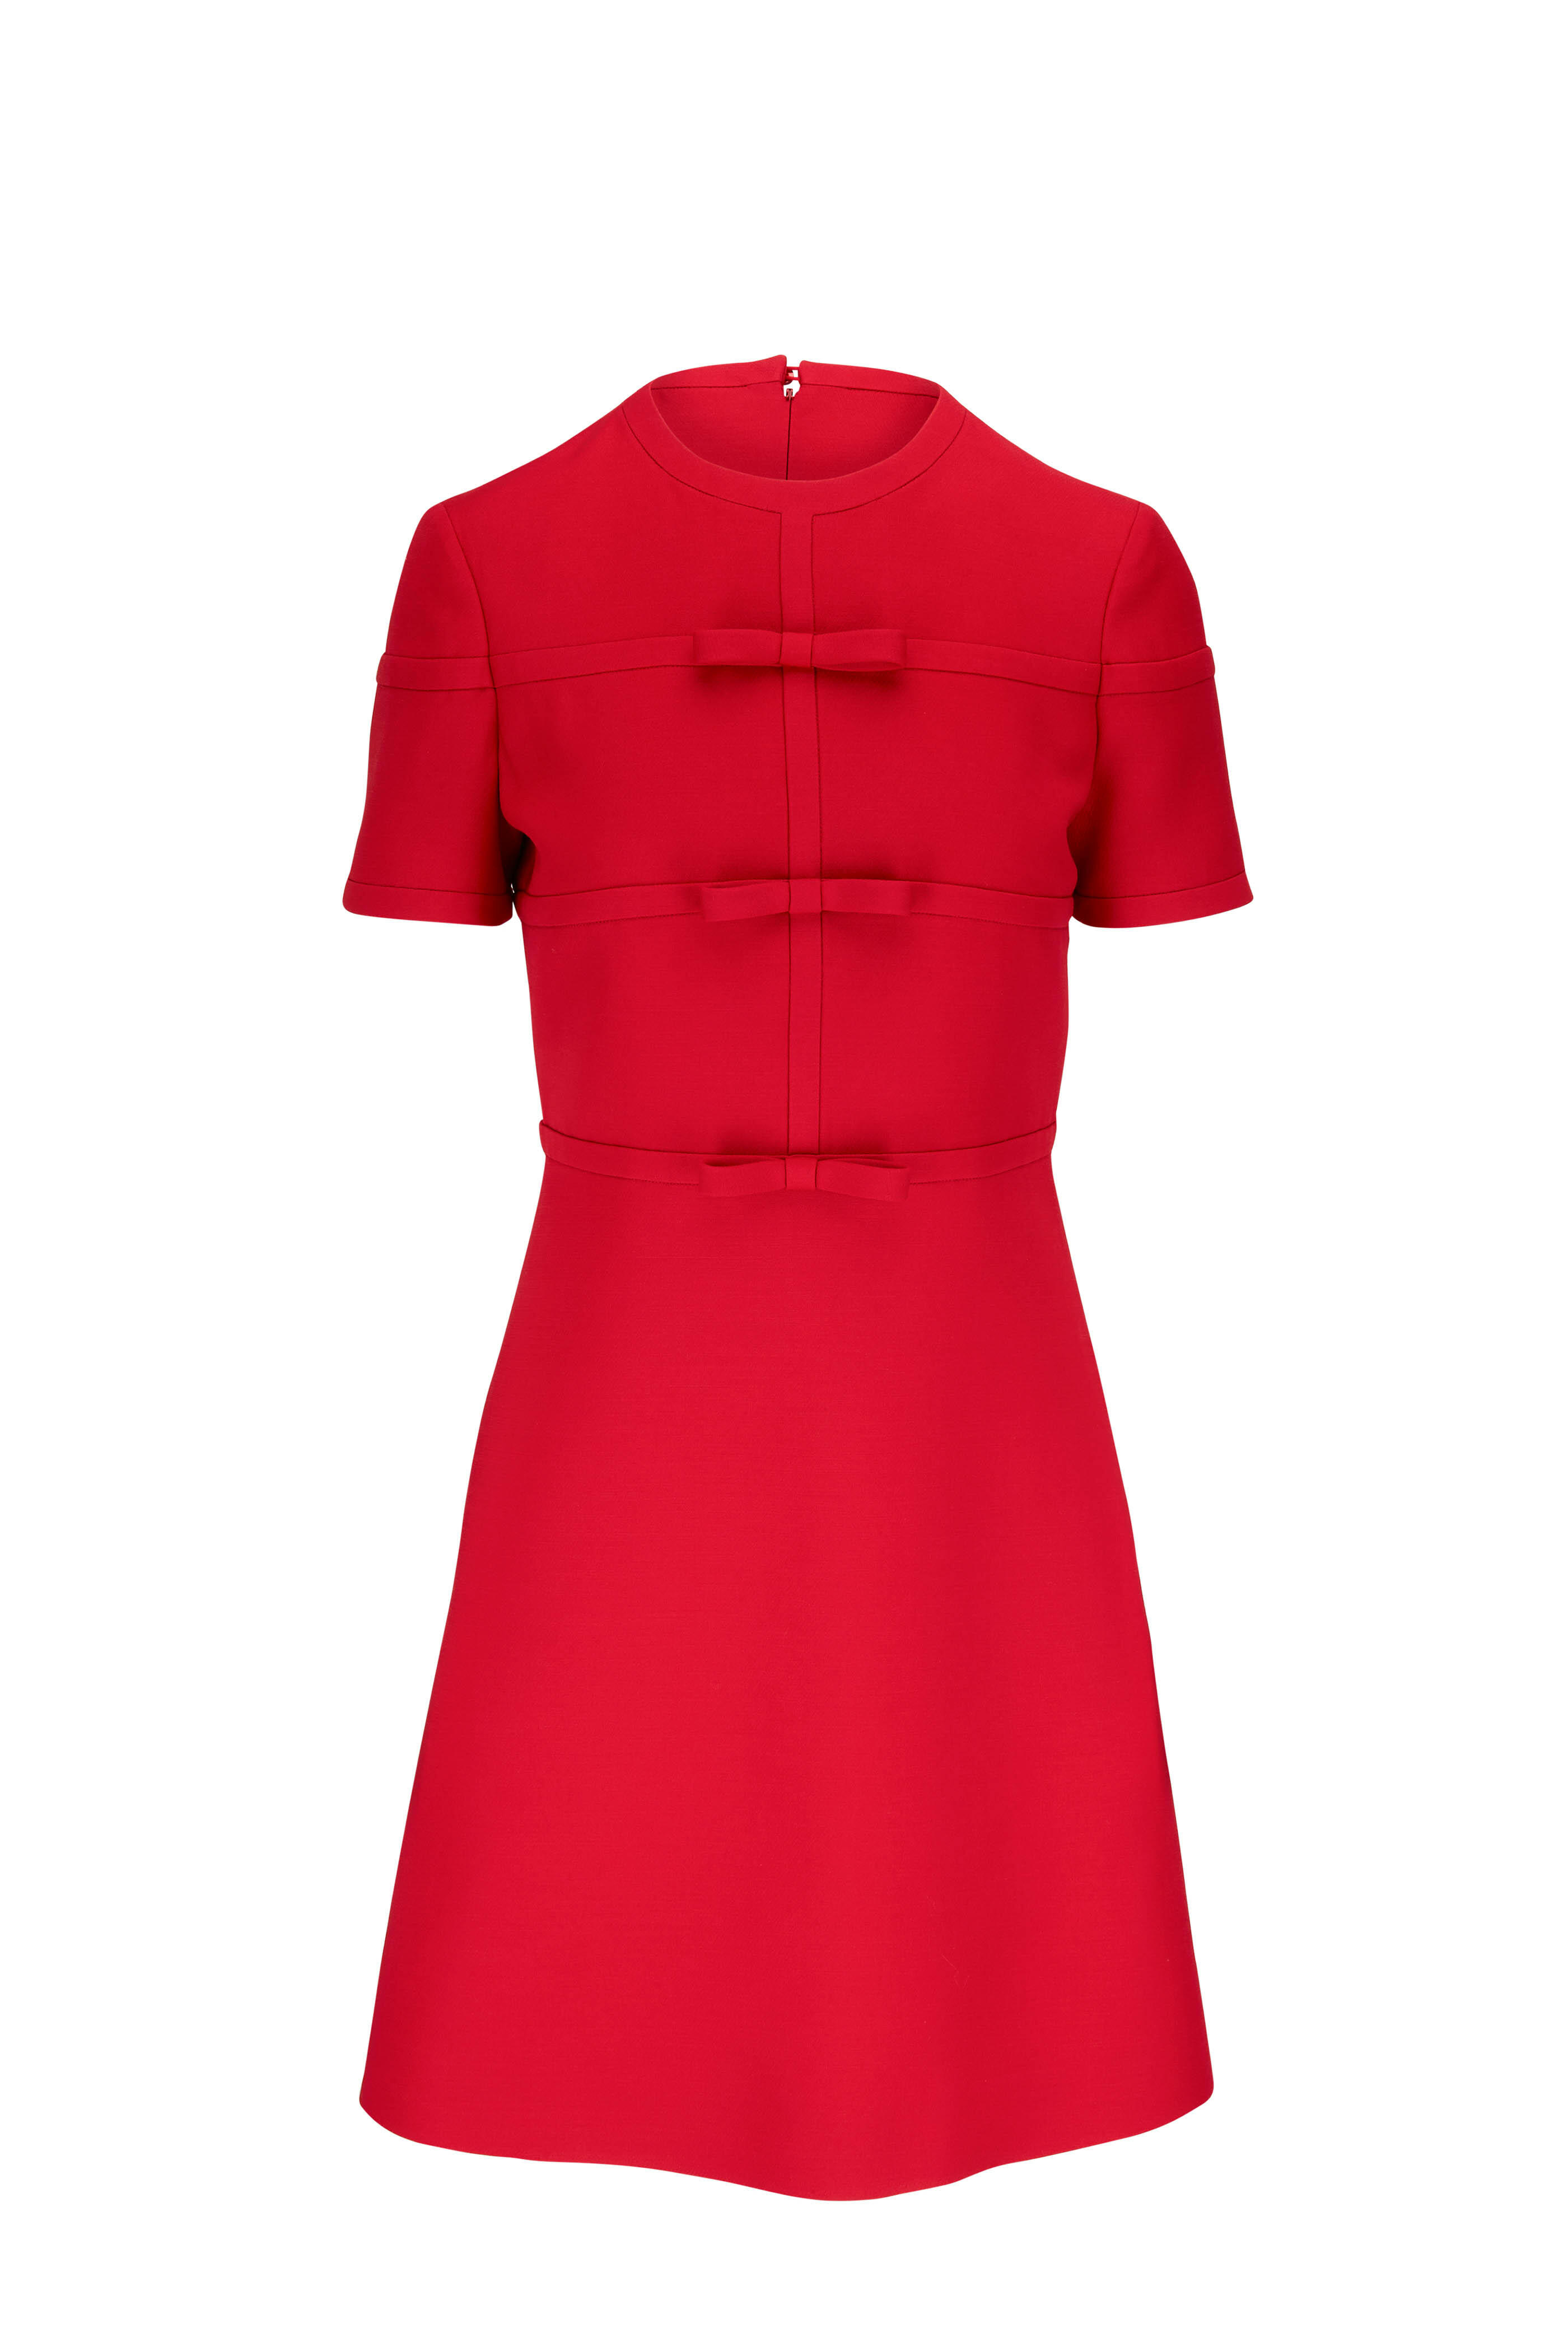 Valentino - Red Crepe Couture Bow A-Line Mini Dress